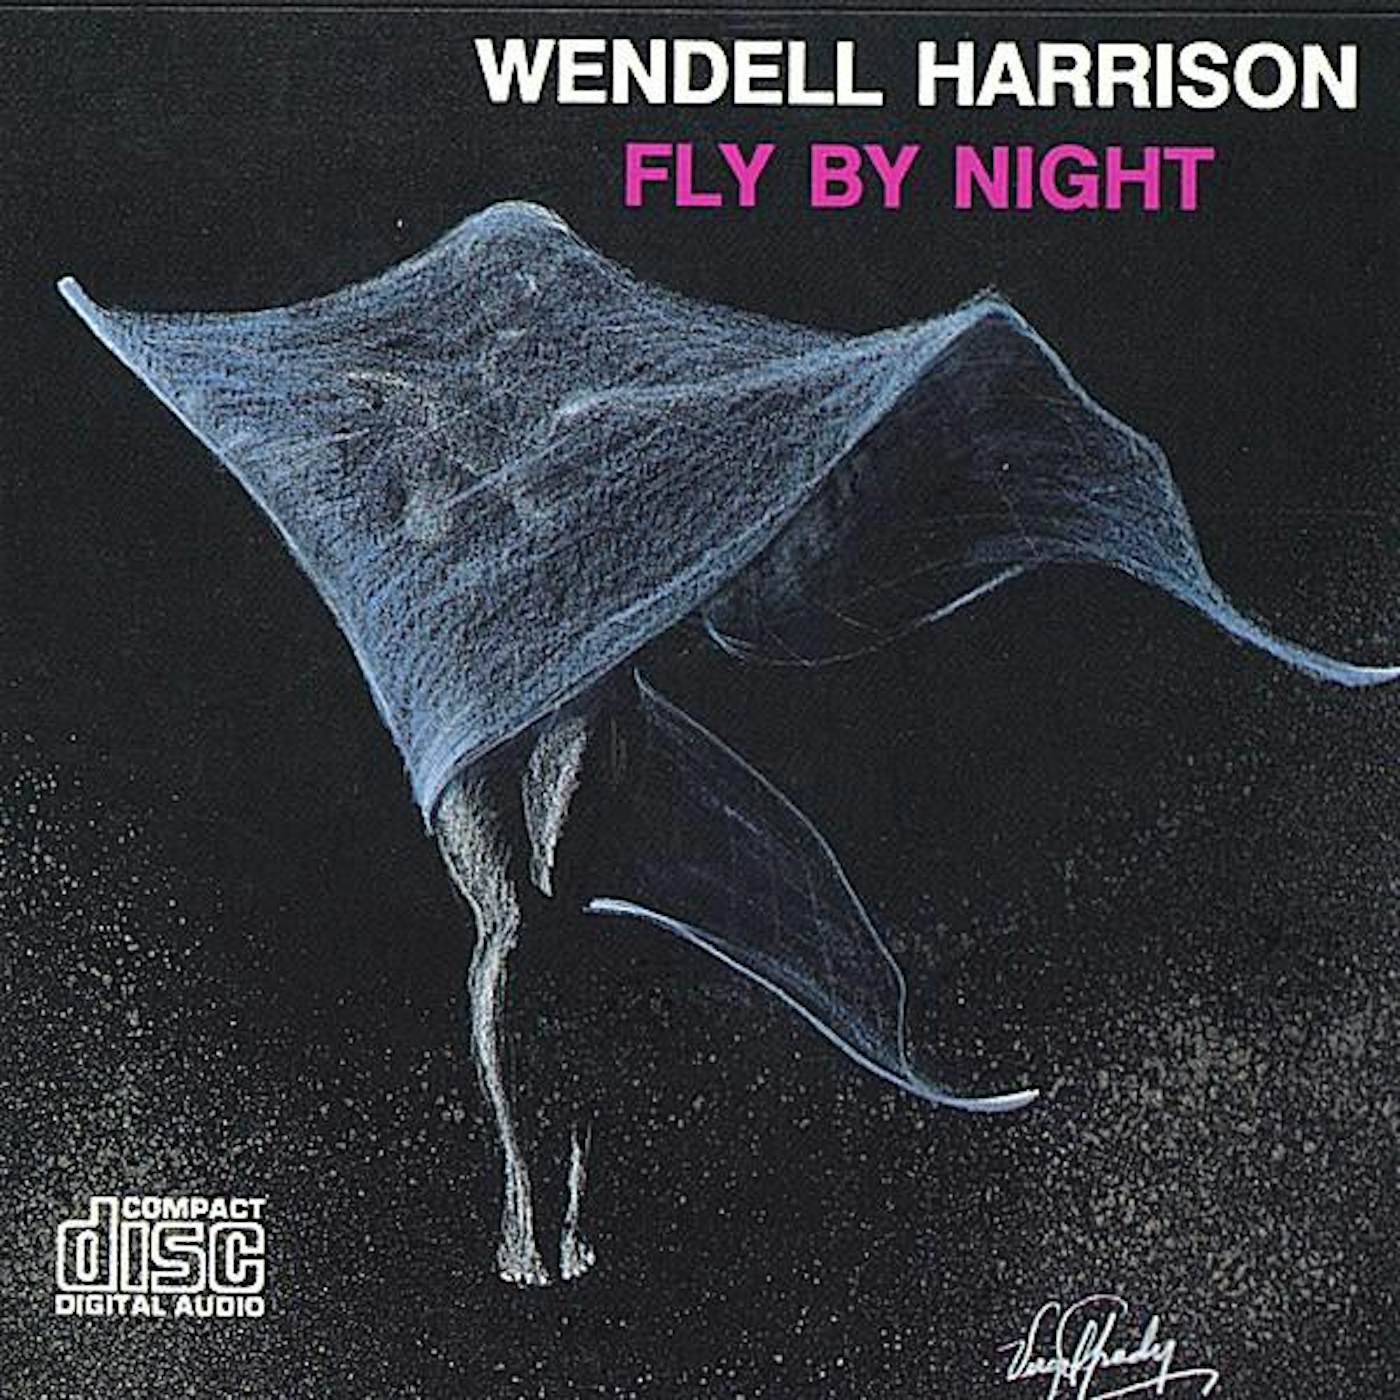 Wendell Harrison FLY BY NIGHT CD